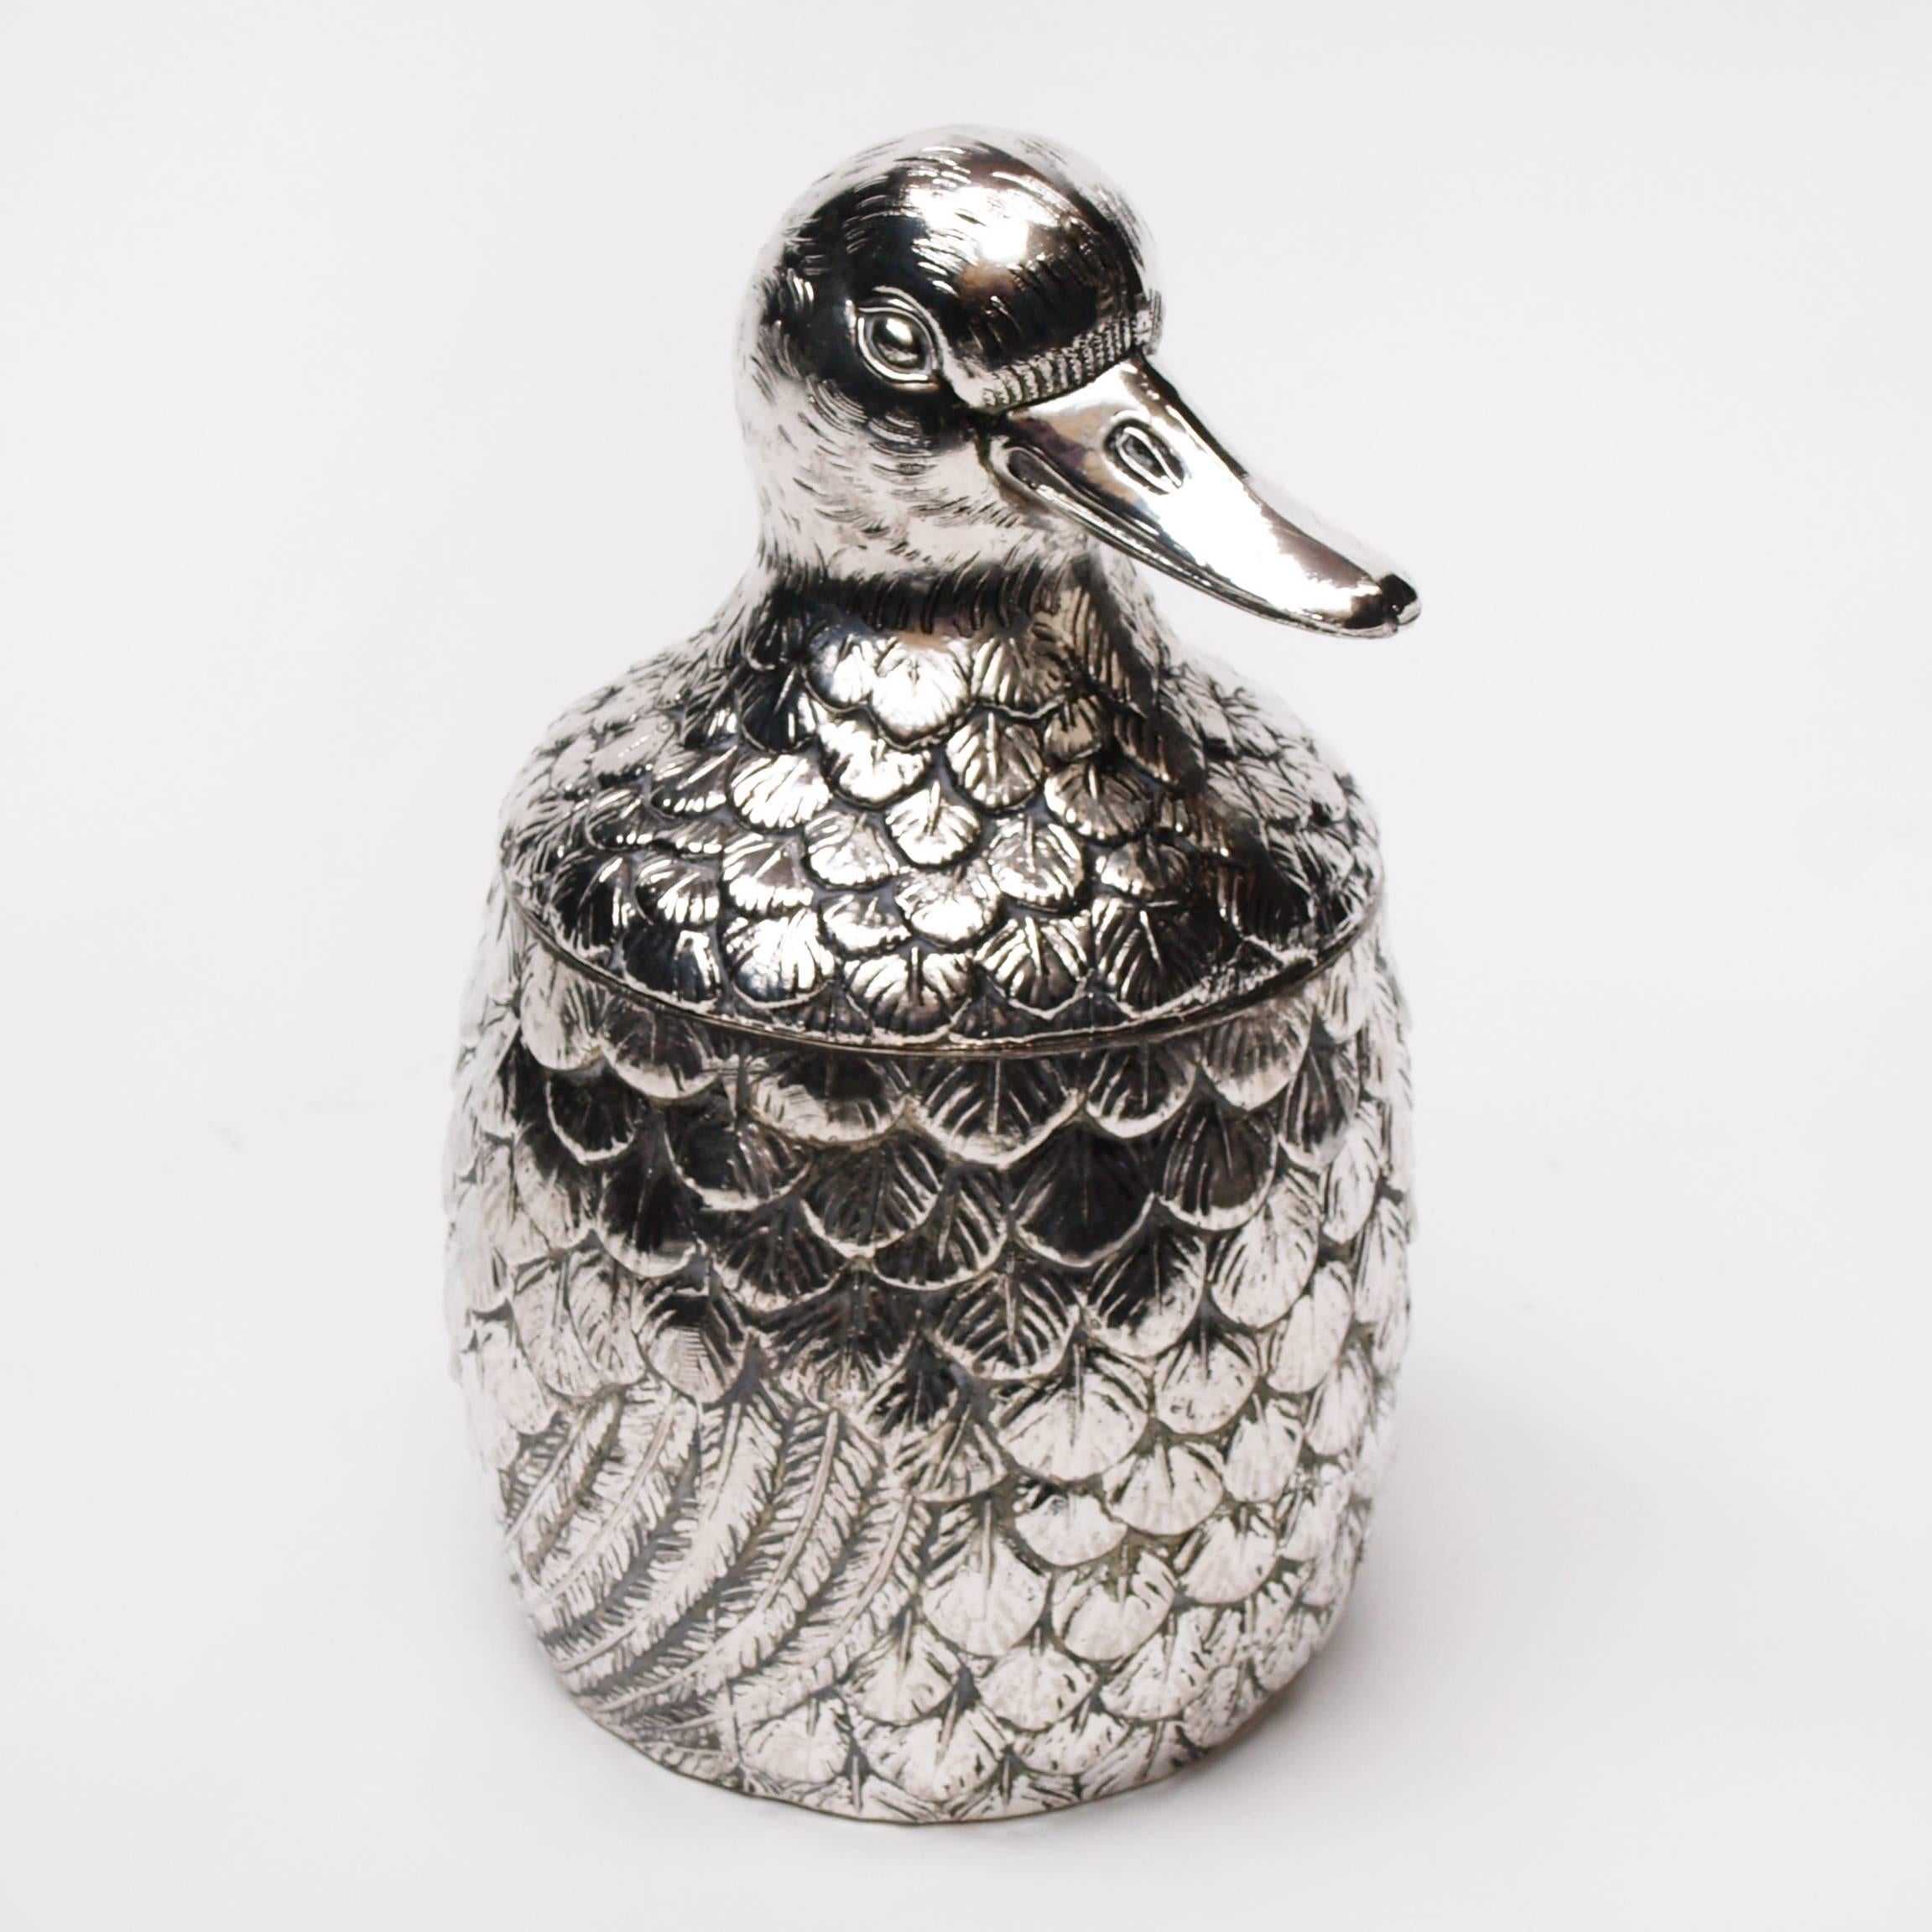 A charming silver metal Mauro Manetti duck-shaped ice bucket, stamped towards the base ‘Made in Italy M\M’. Mauro Manetti’s elaborate ice bucket designs have become archetypal and so often imitated.